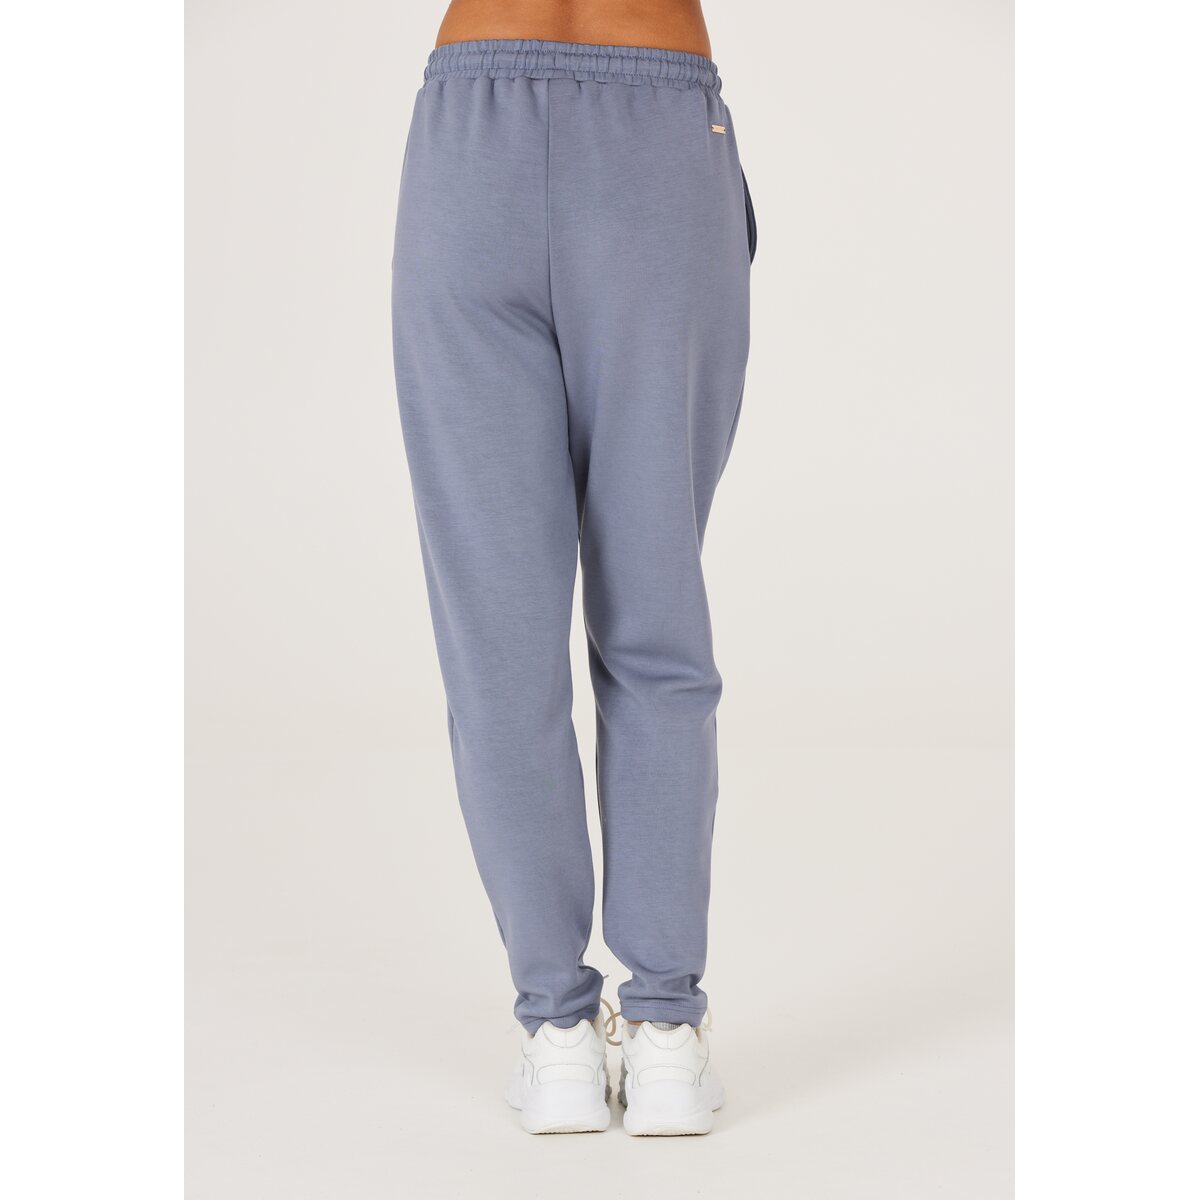 Athlecia Jacey V2 Womenswear Sweat Pants 3 Shaws Department Stores